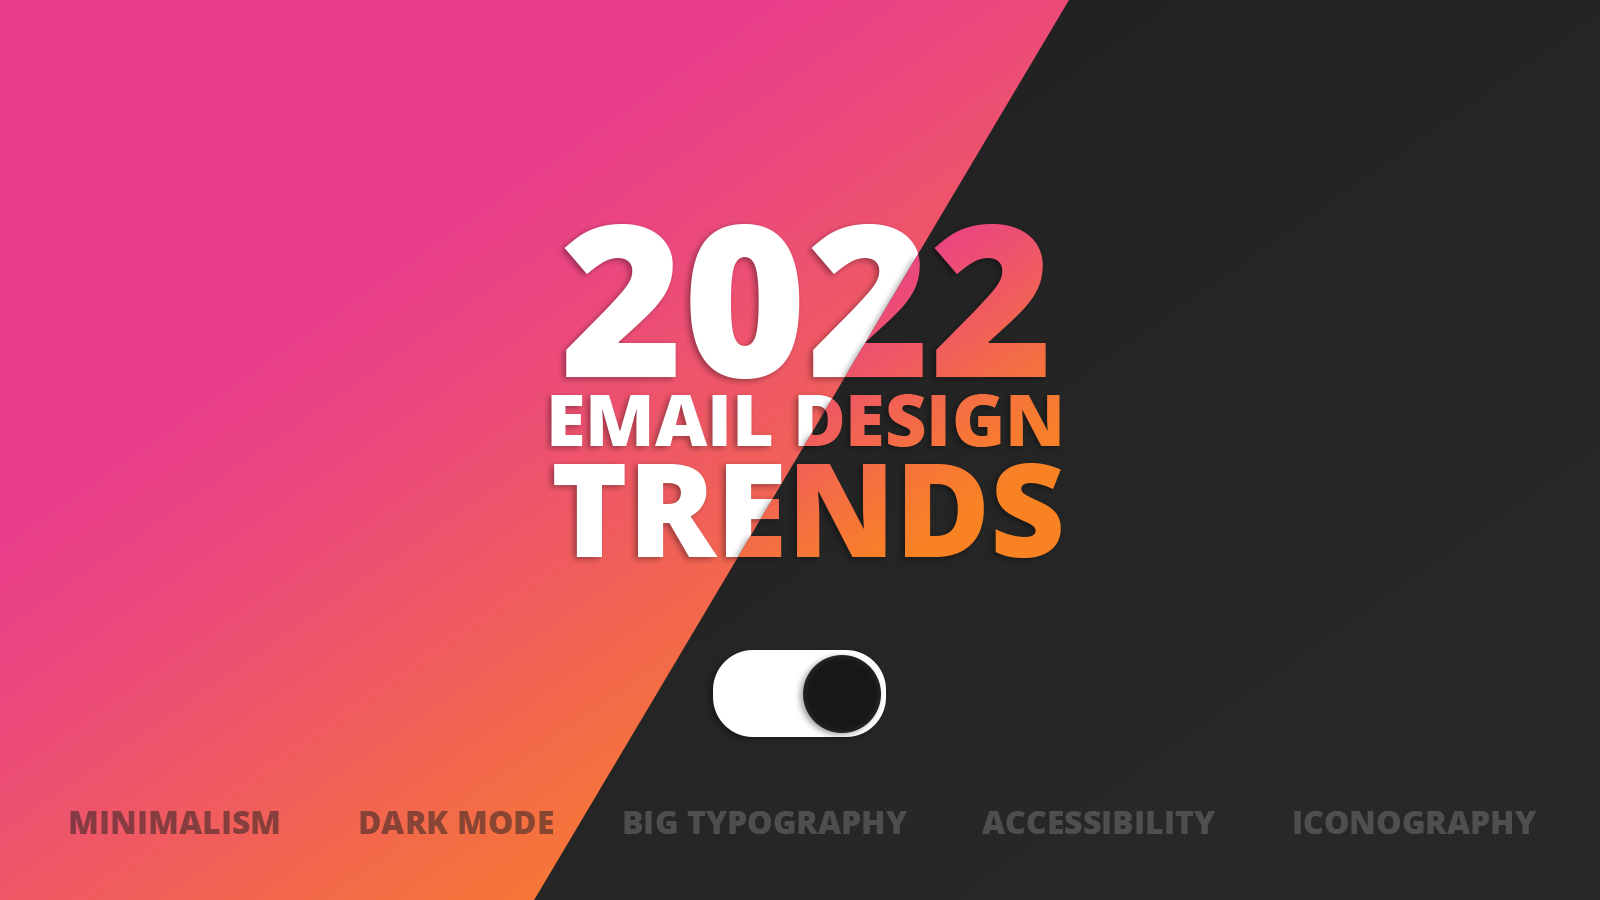 5 design trends to inspire your email comms (2022 edition)